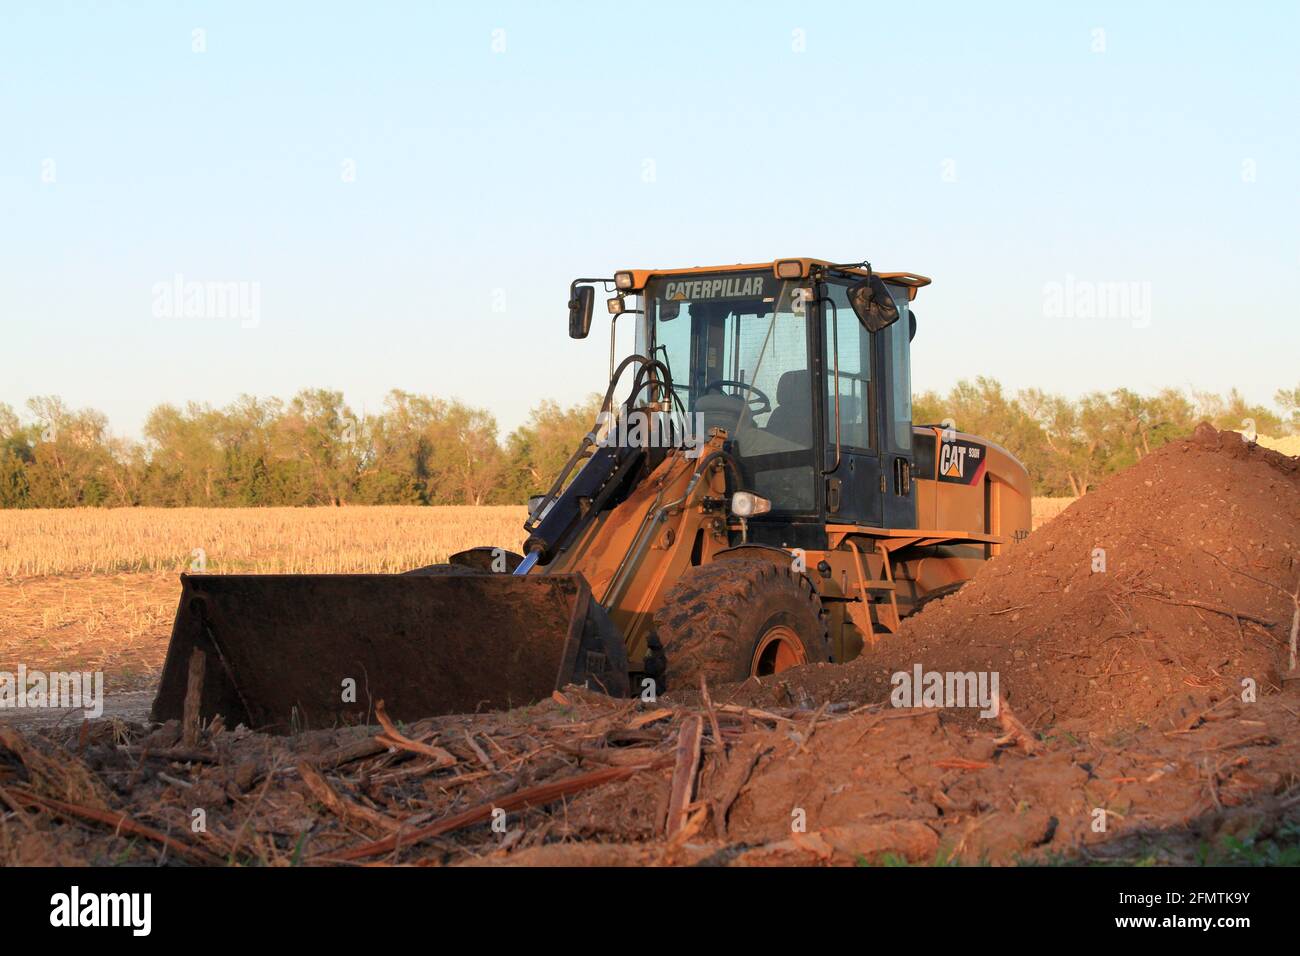 A Caterpillar Front End loader in a field with a pile of dirt  ready for work north of Lyons Kansas USA on a colorful day. Stock Photo